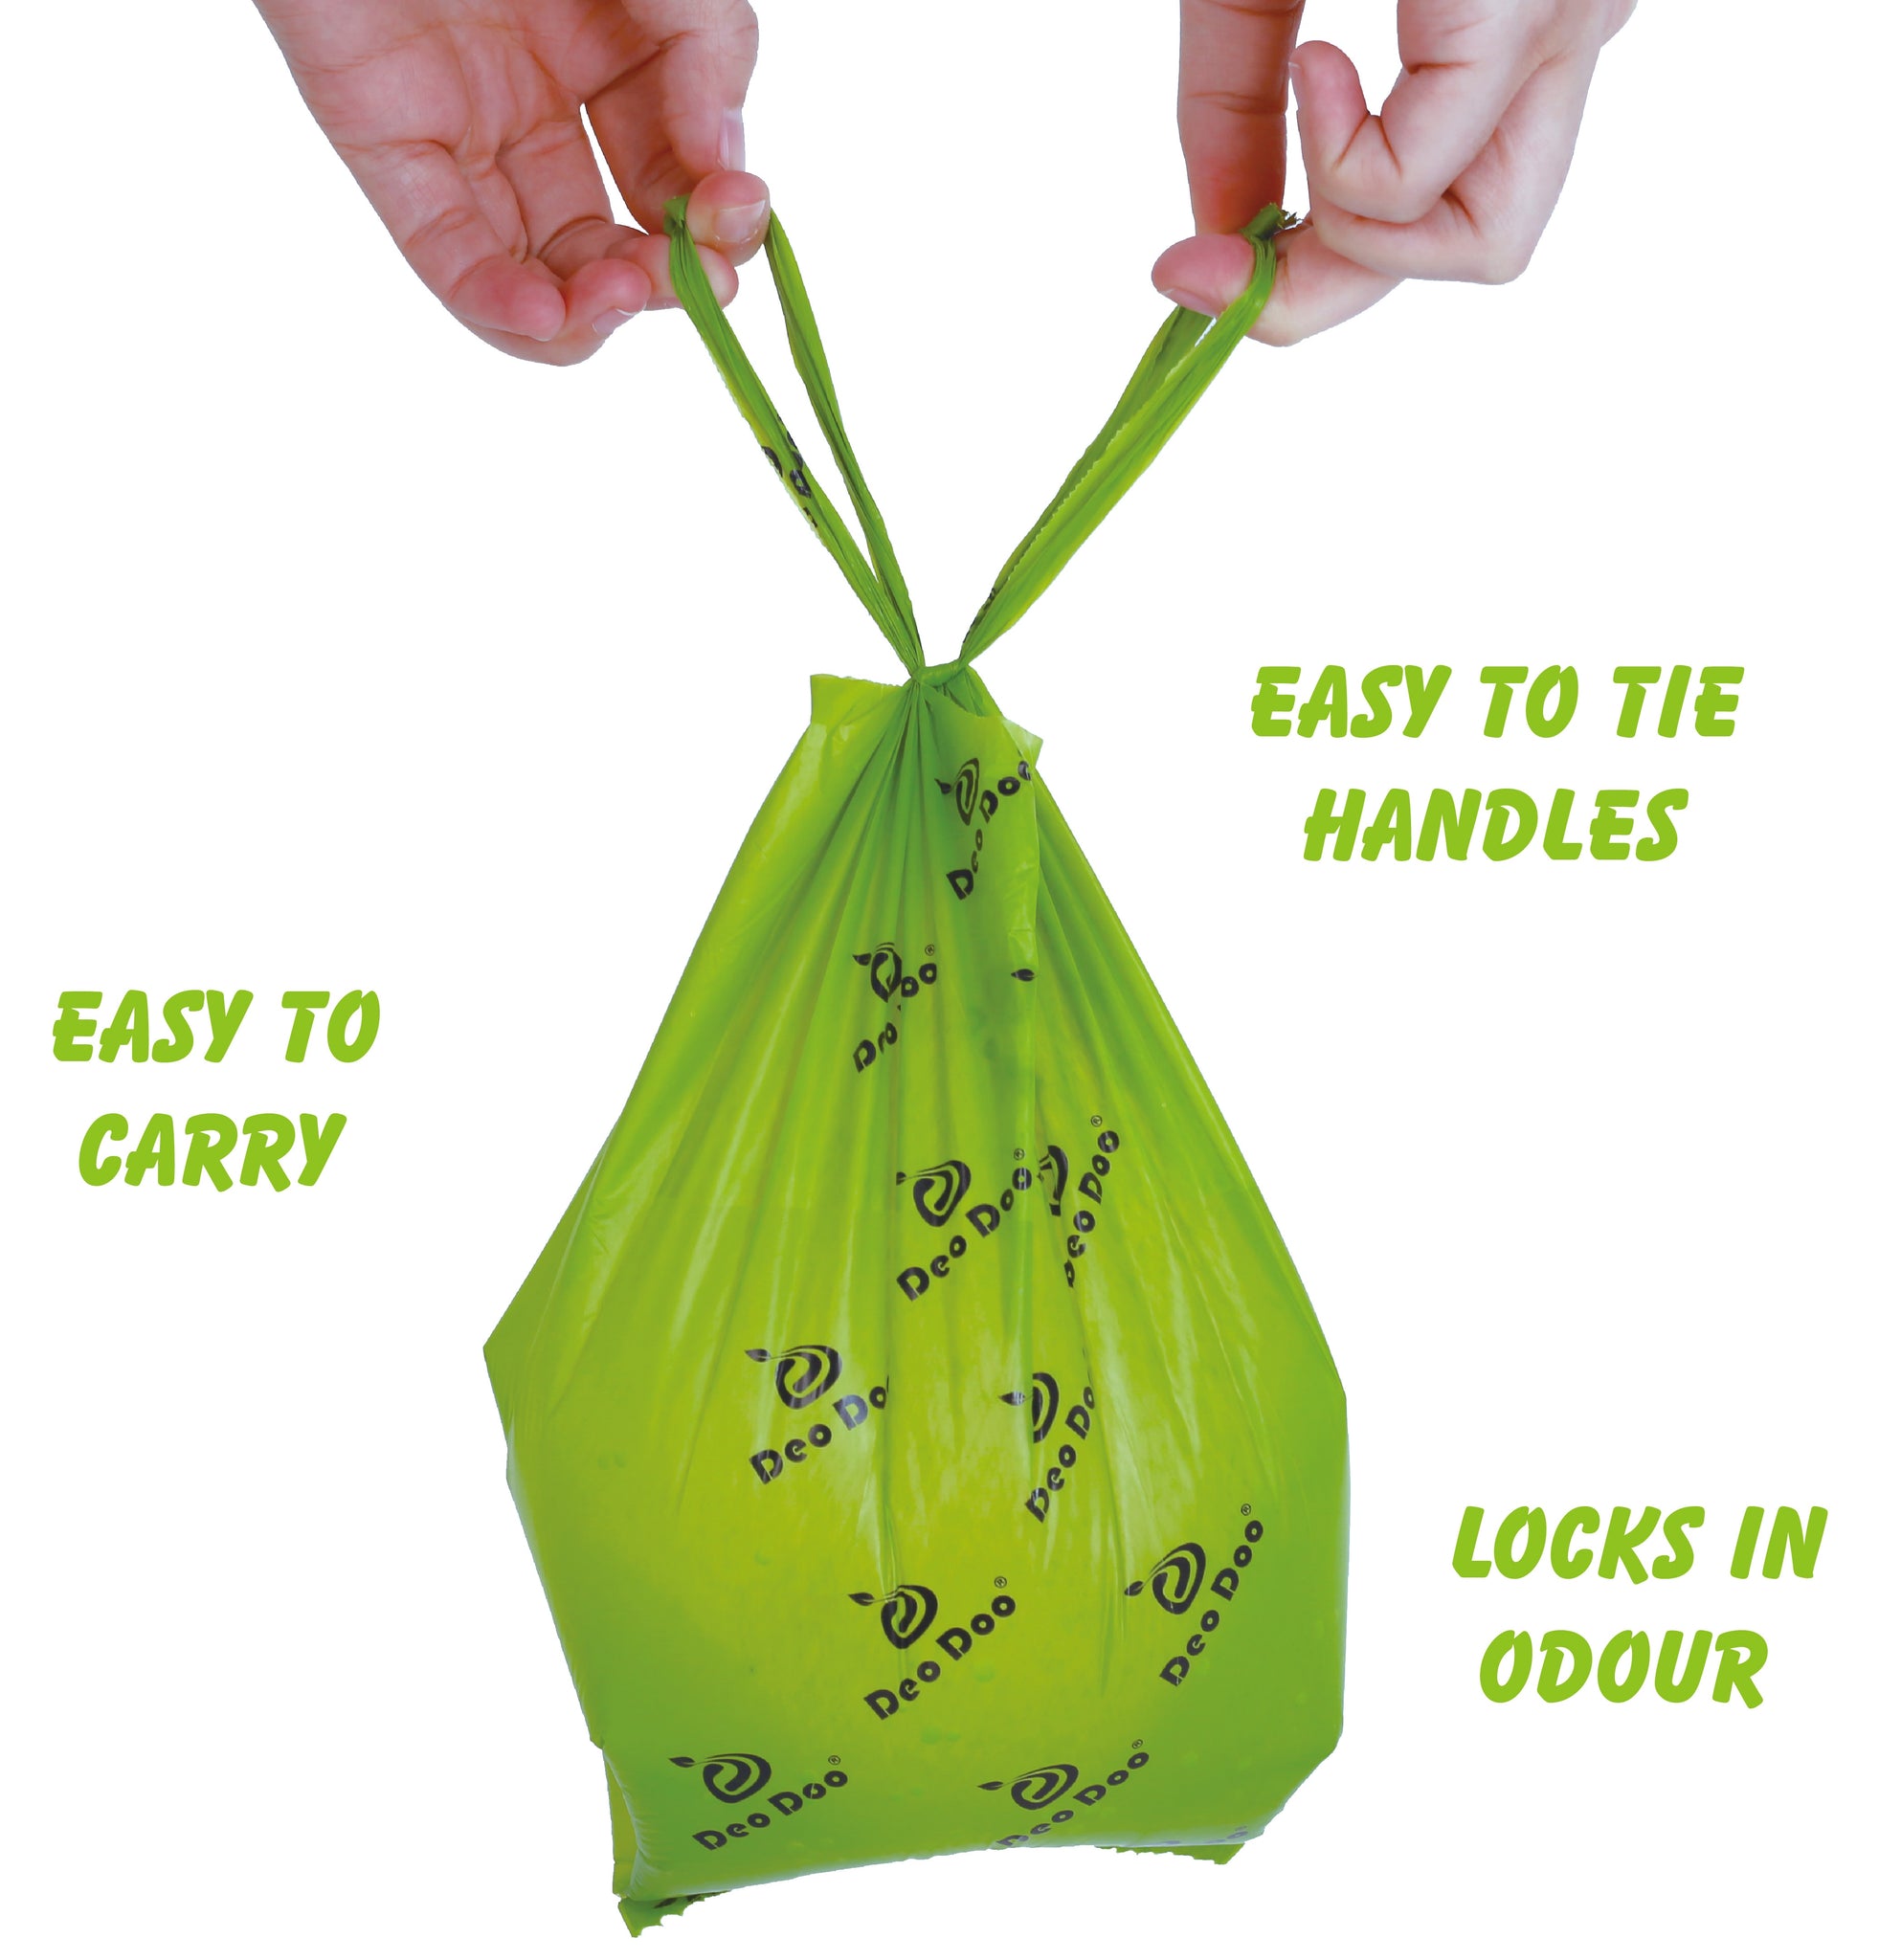 Always be ready on your dog walks with Biodegradable Dog Poop Bags. Because while your neighbors might love a friendly visit from your pooch, they don’t love what he leaves behind, and so the convenient poop bags allow you to easily clean it up. Plus, they feature tie handles, which enable you to quickly and cleanly tie off the bag, and keep the mess inside where it belongs.